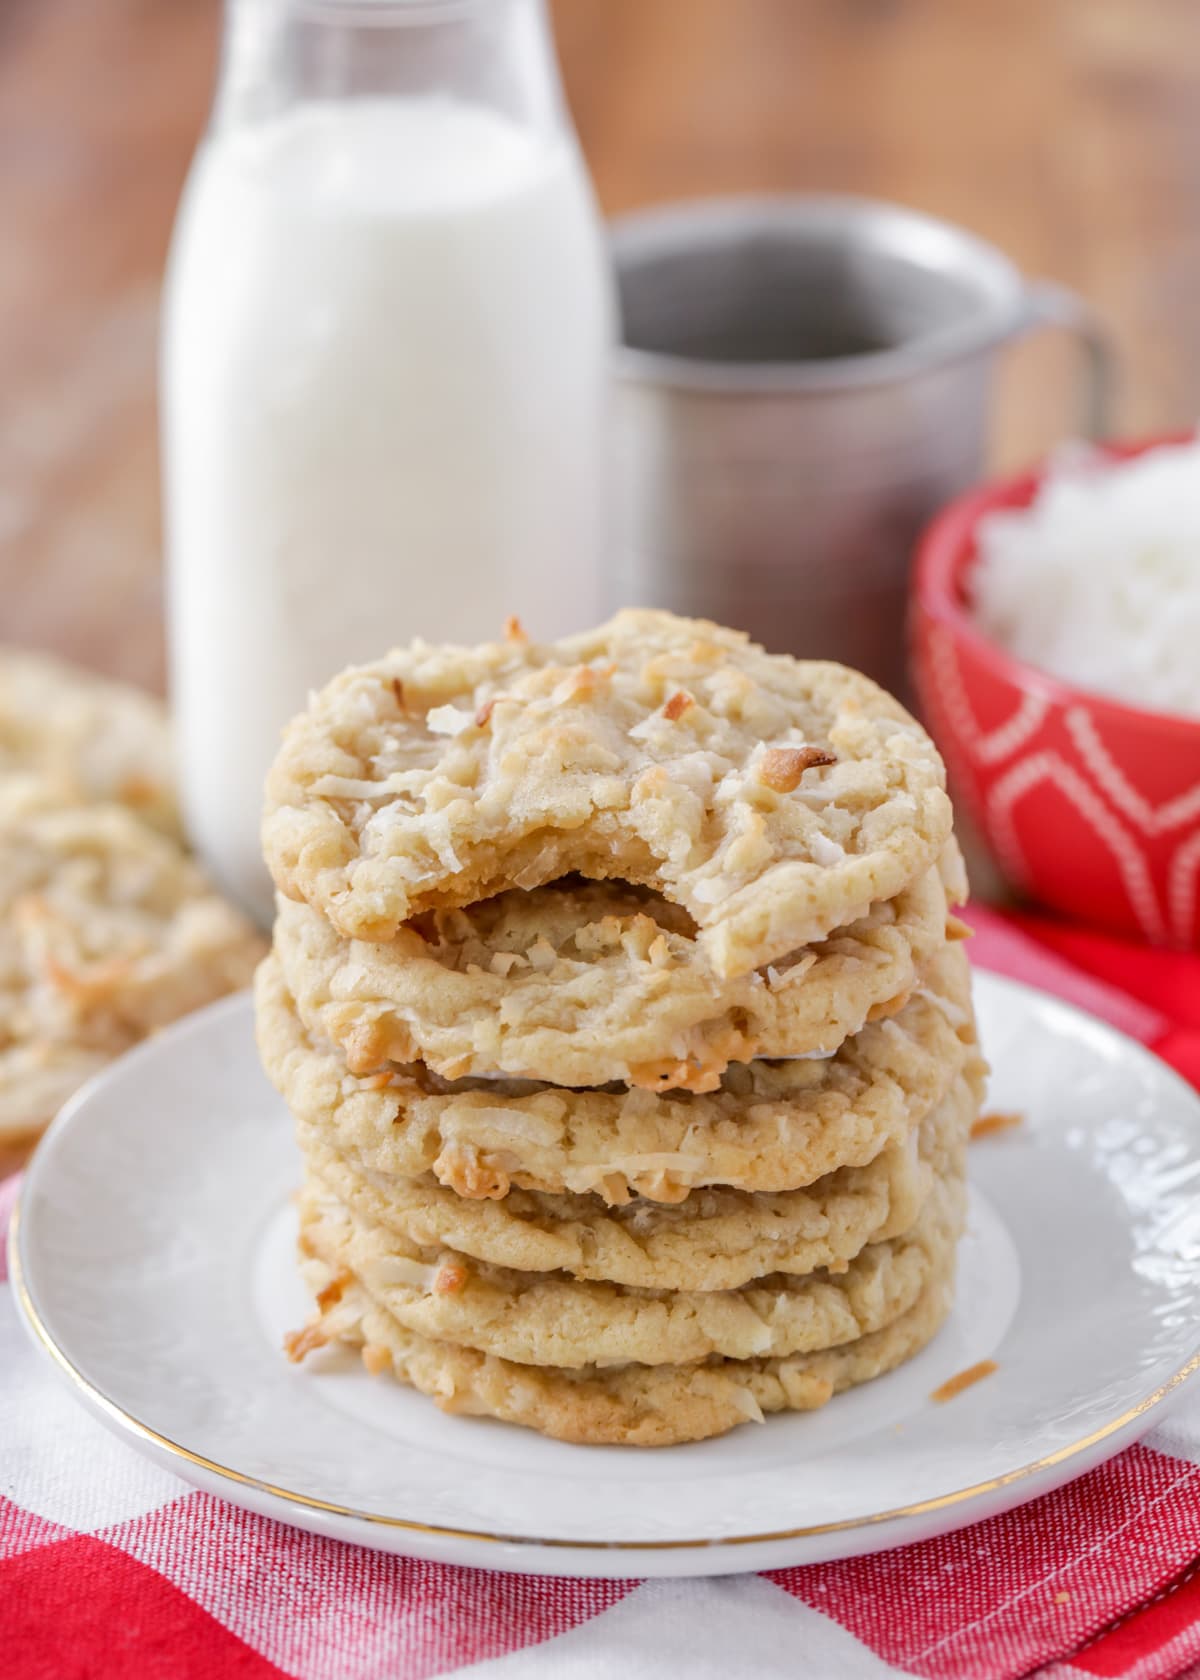 Coconut cookies stacked on a wooden table.